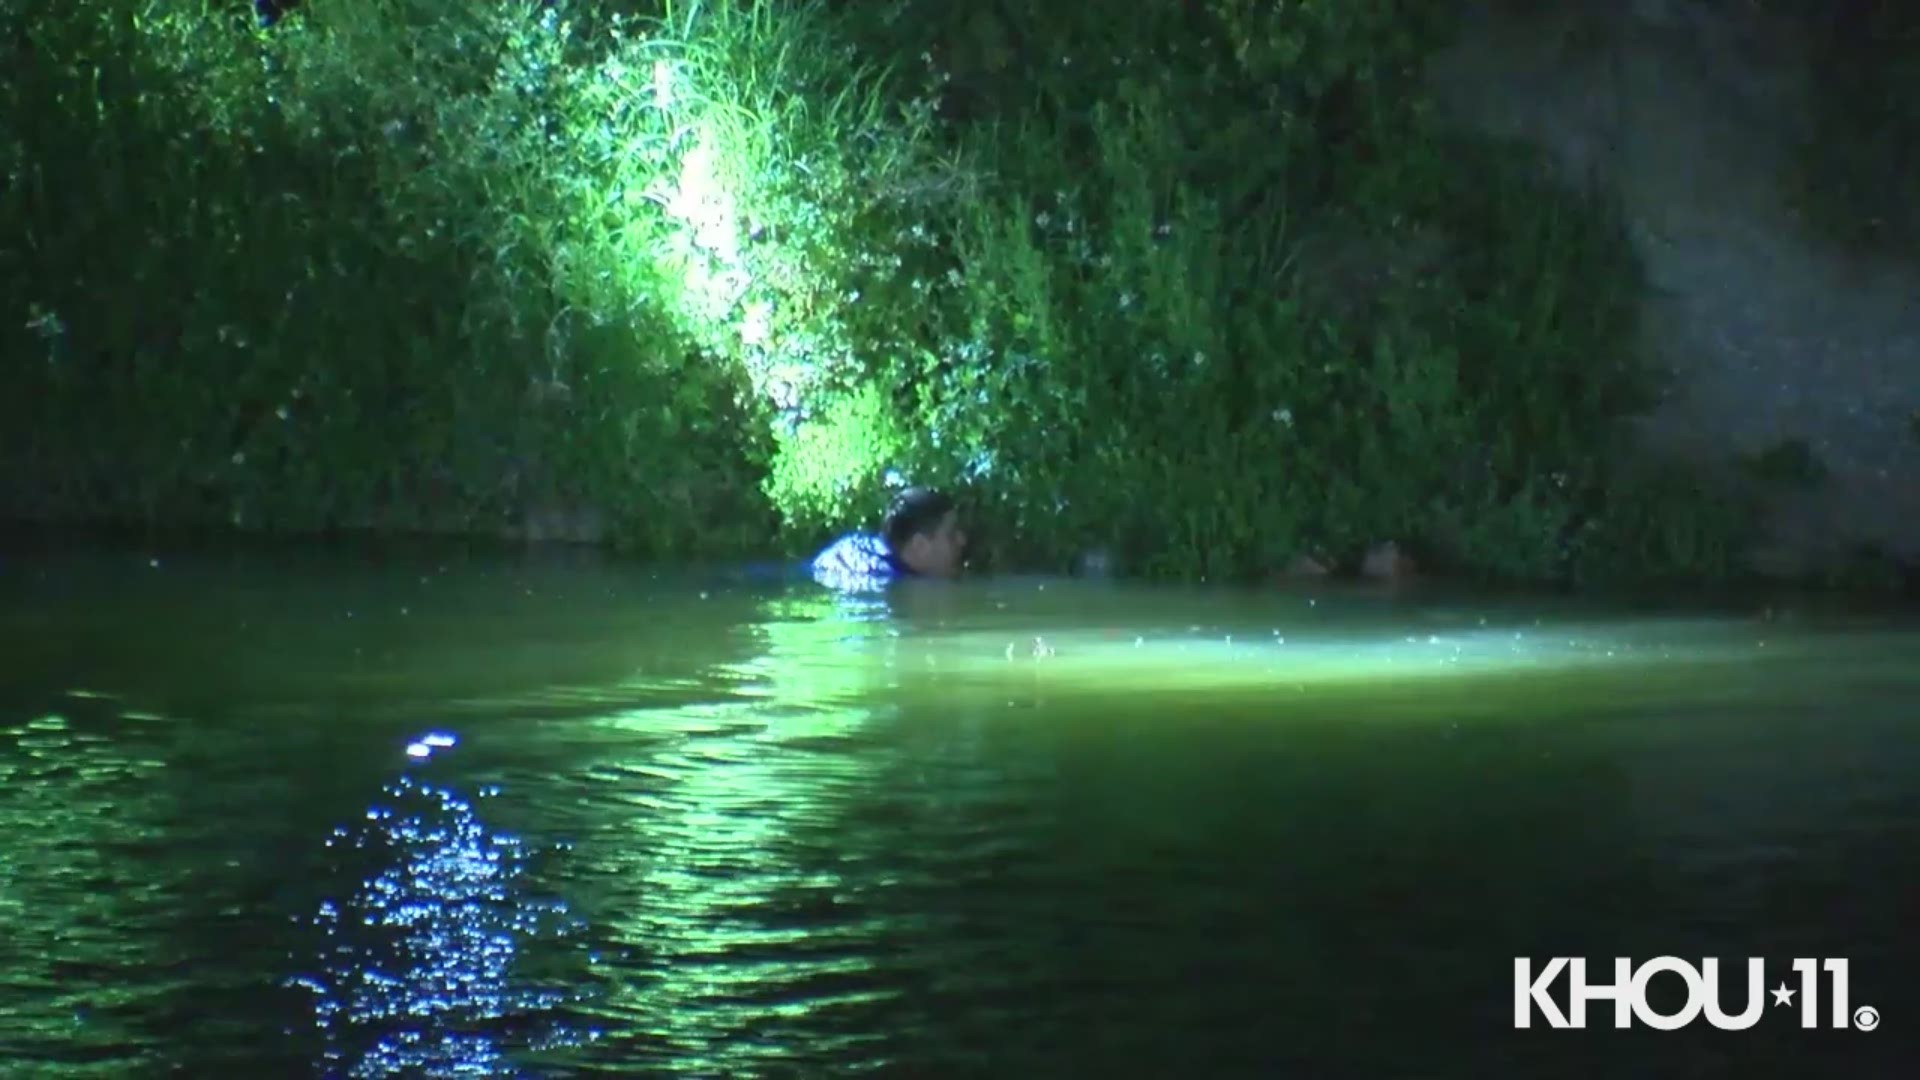 Four carjacking suspects were arrested after a chase ended with a stolen vehicle crashing into Brays Bayou overnight.